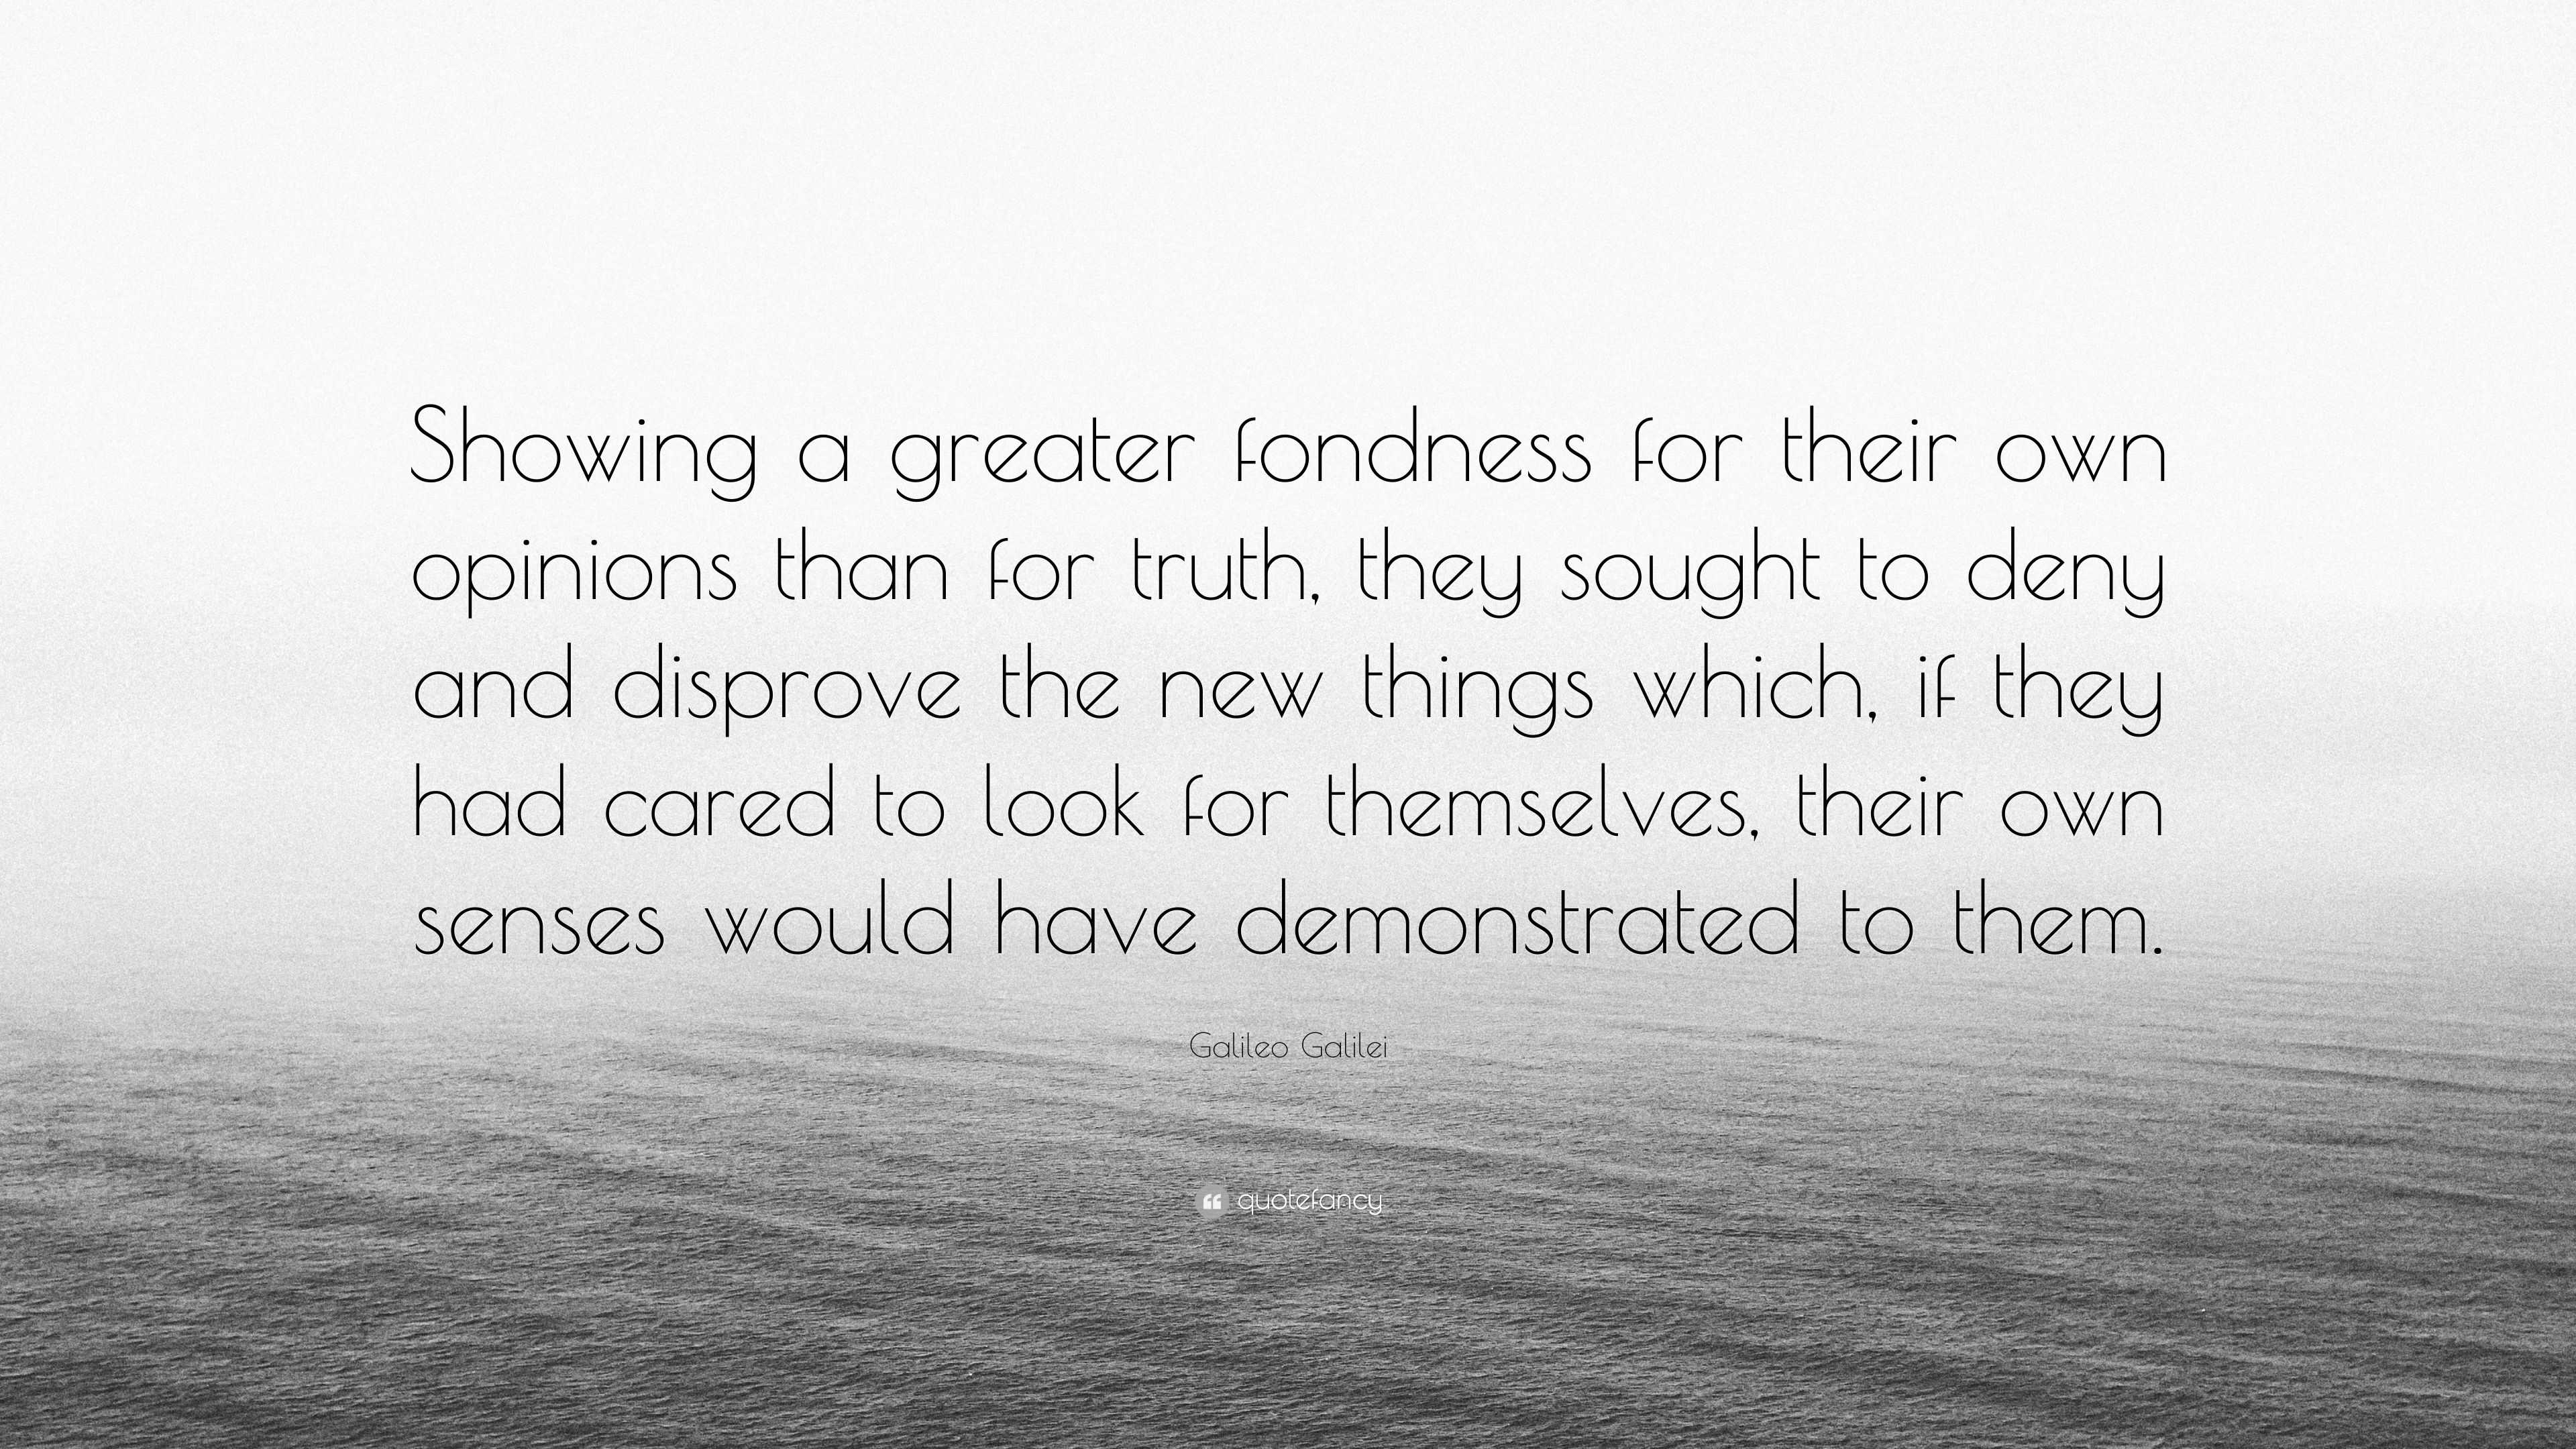 Galileo Galilei Quote: "Showing a greater fondness for ...